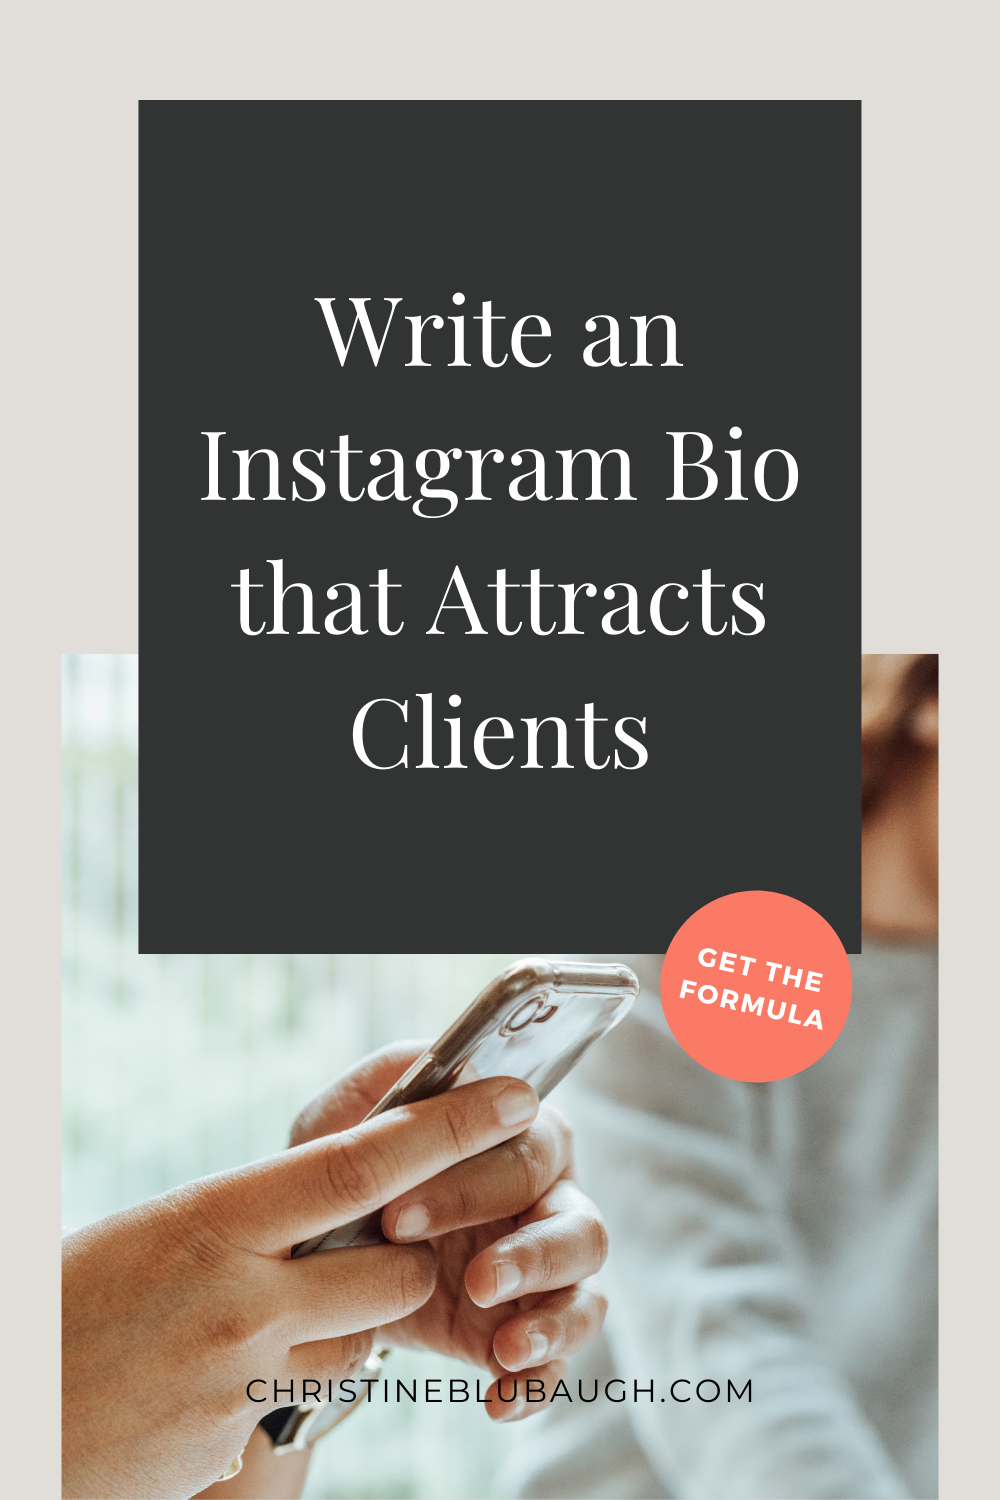 Write an Instagram bio that attracts clients